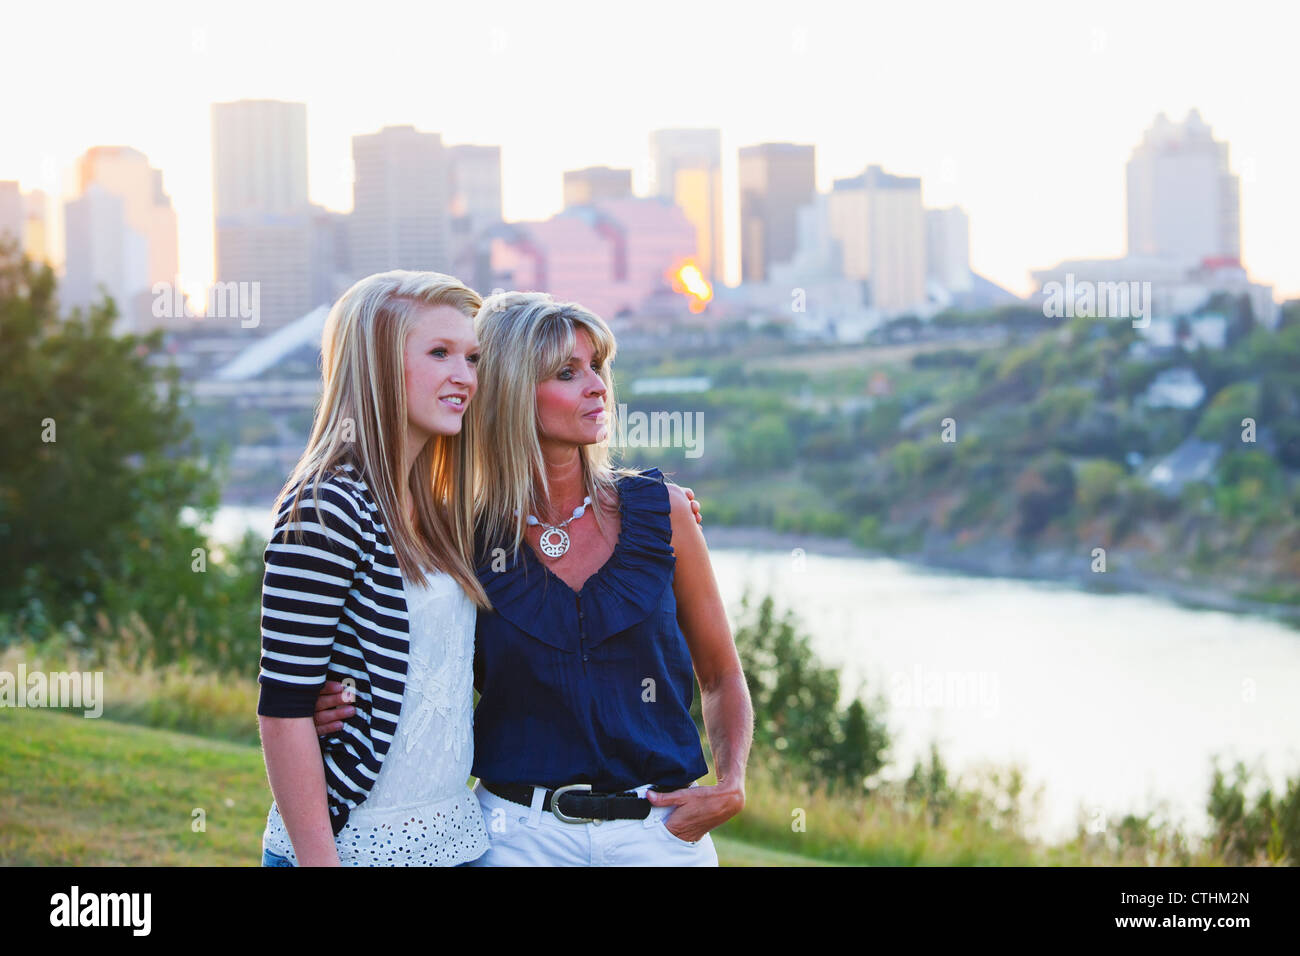 Mother And Daughter In A Park Together With The City Skyline In The Background; Edmonton, Alberta, Canada Stock Photo